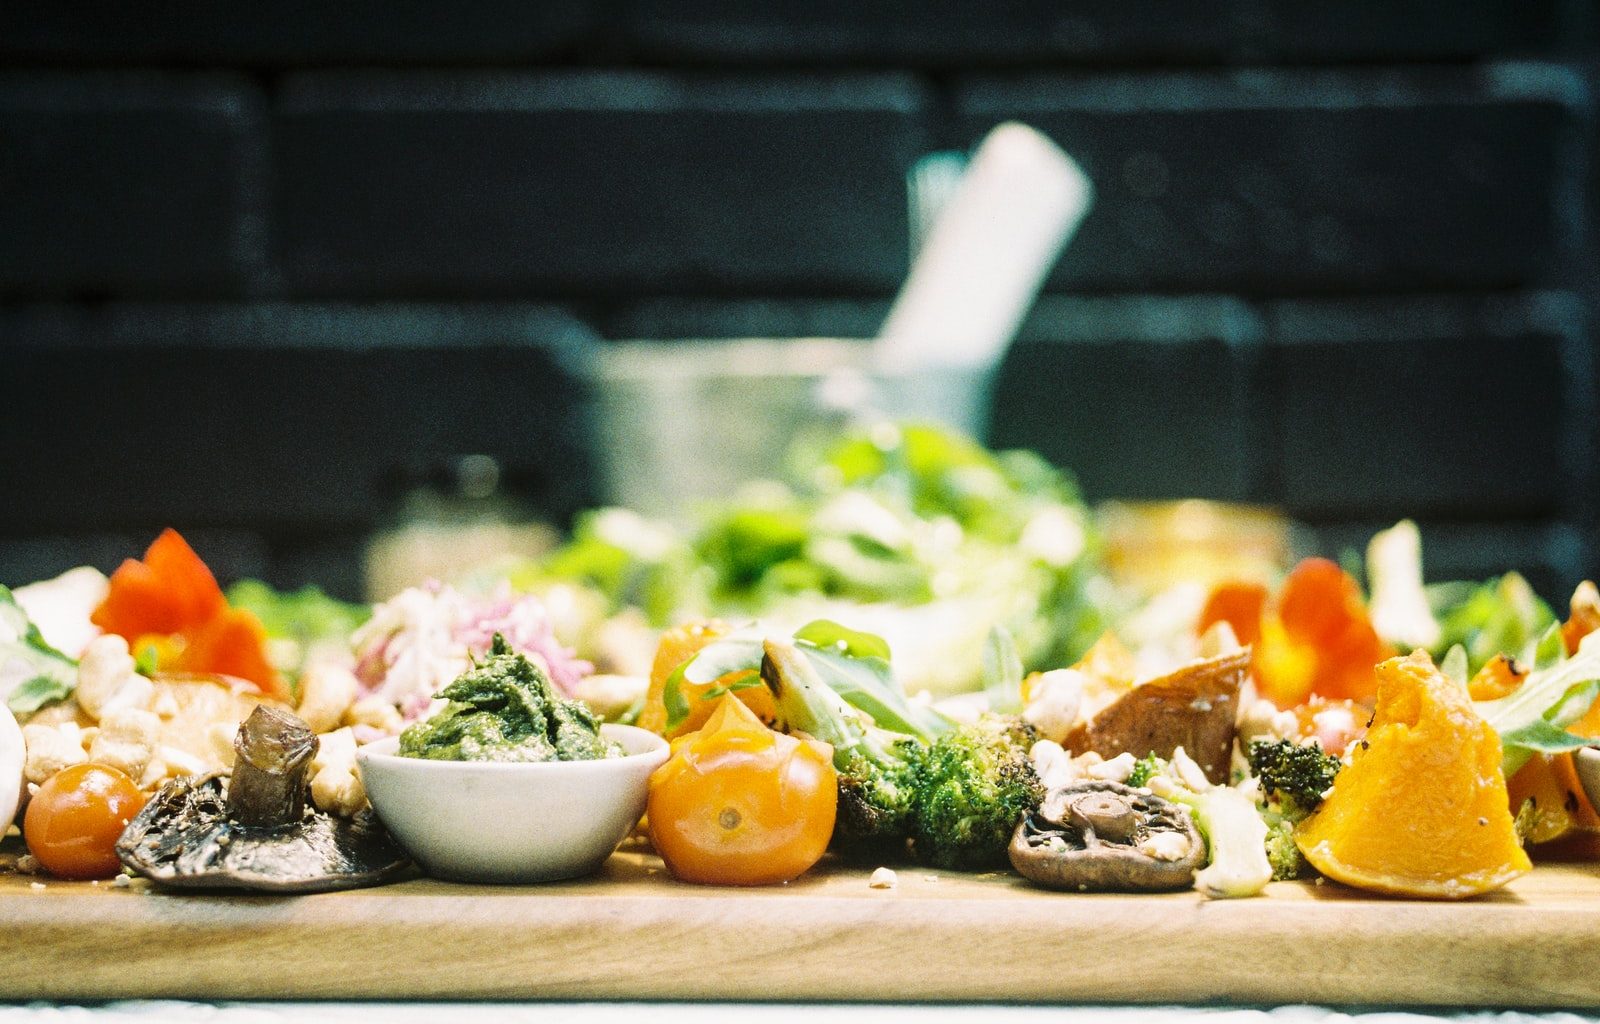 selective focus photography of tray of food